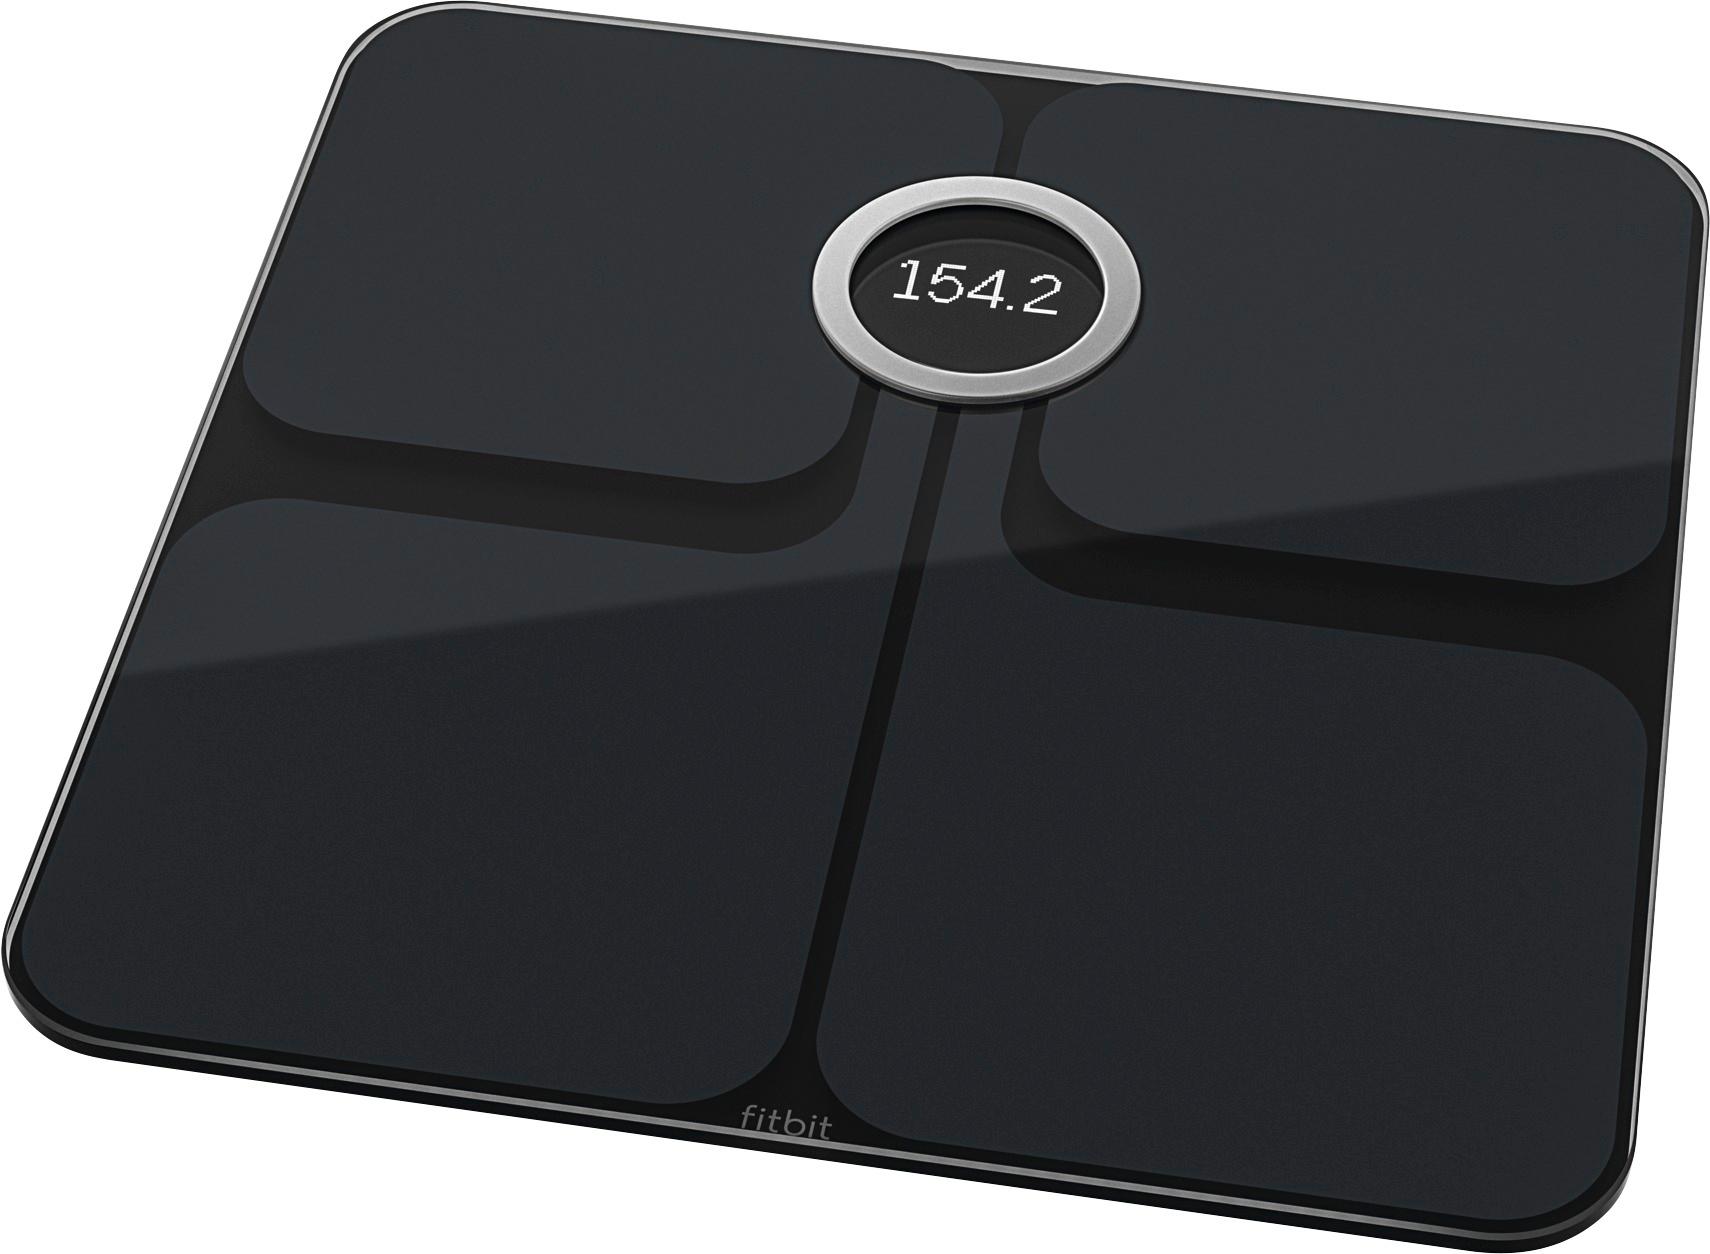 Scale Insights: Understanding The Functions Of The Fitbit Scale